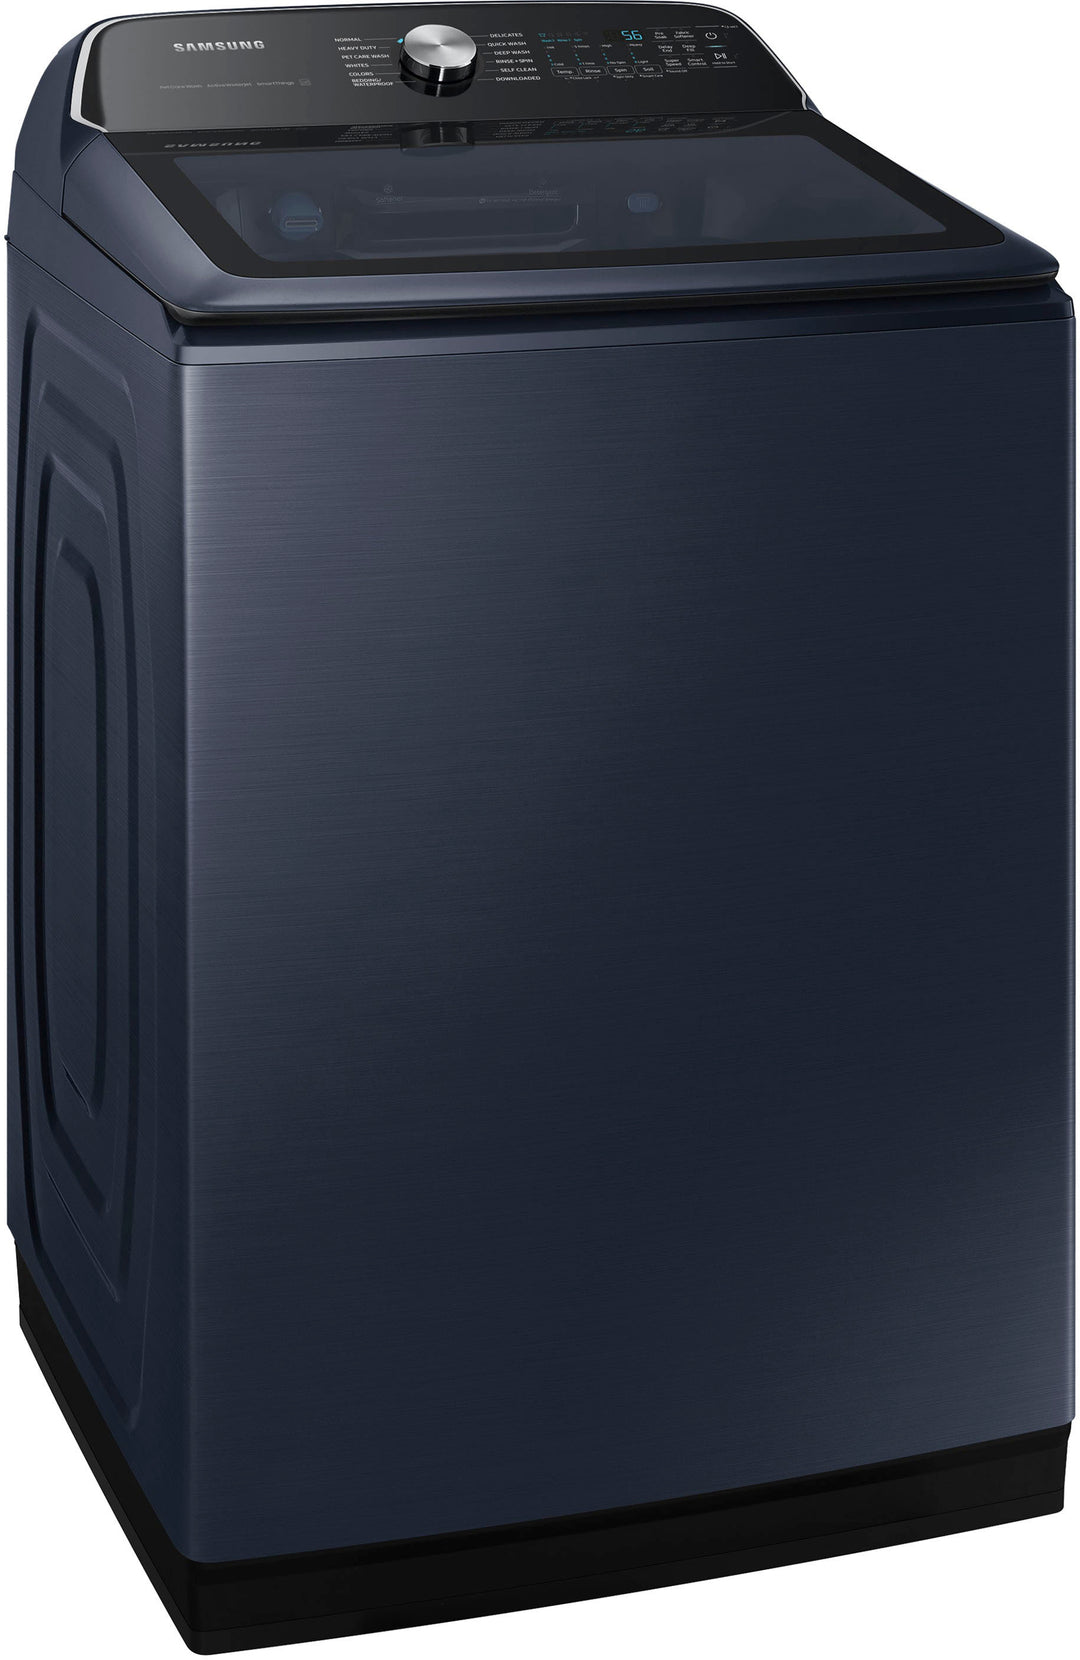 Samsung - 5.4 cu. ft. Smart Top Load Washer with Pet Care Solution and Super Speed Wash - Brushed Navy_8